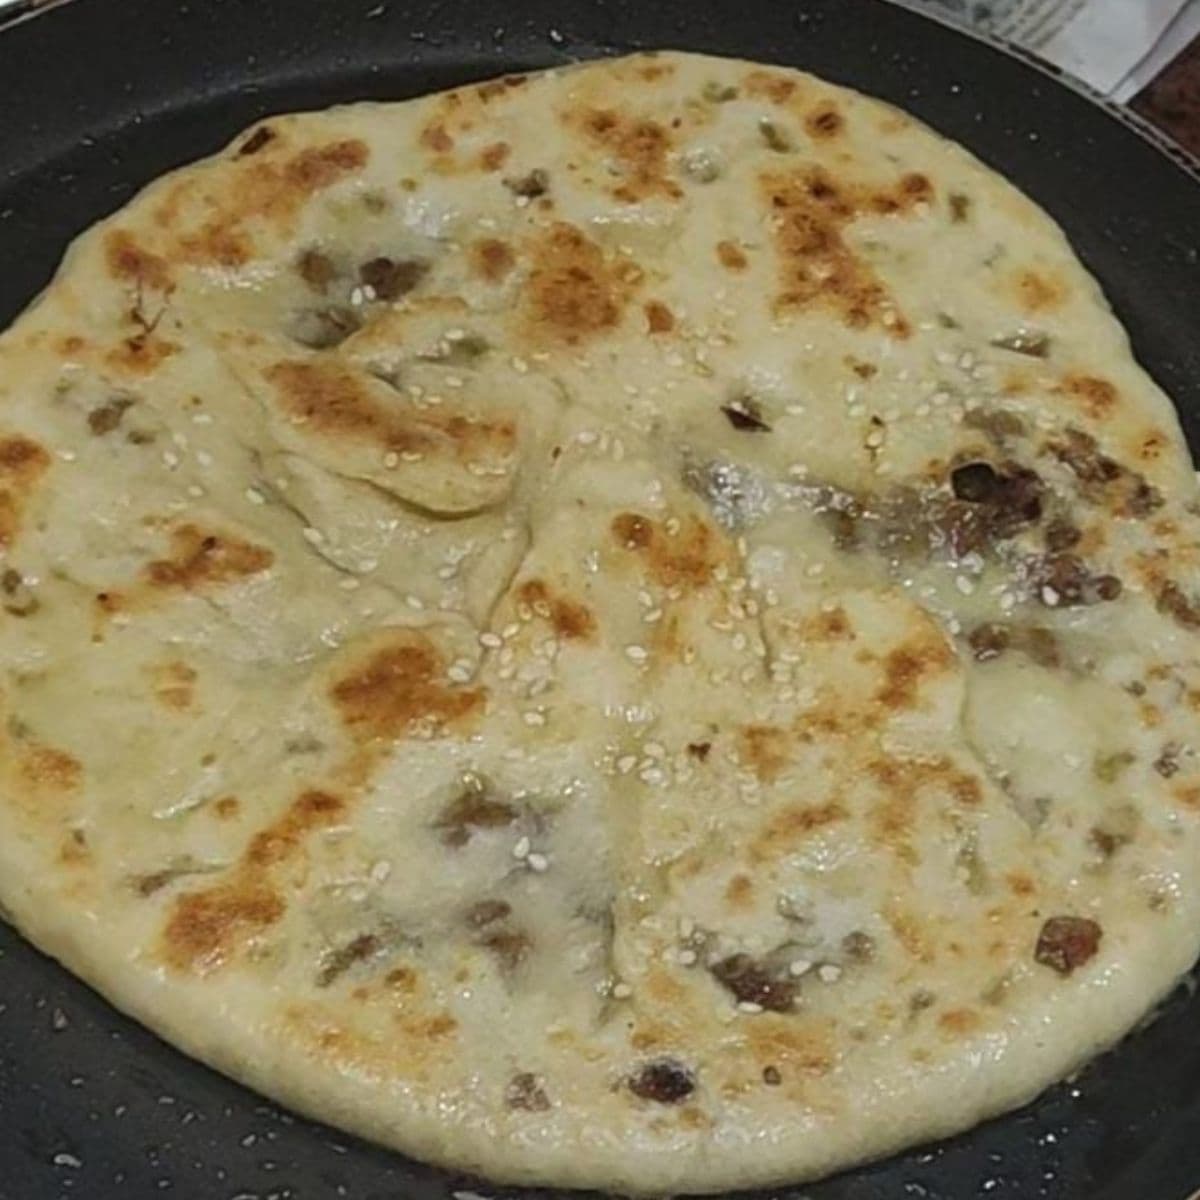 steps to ready and cook keema naan or stuffed naan at home